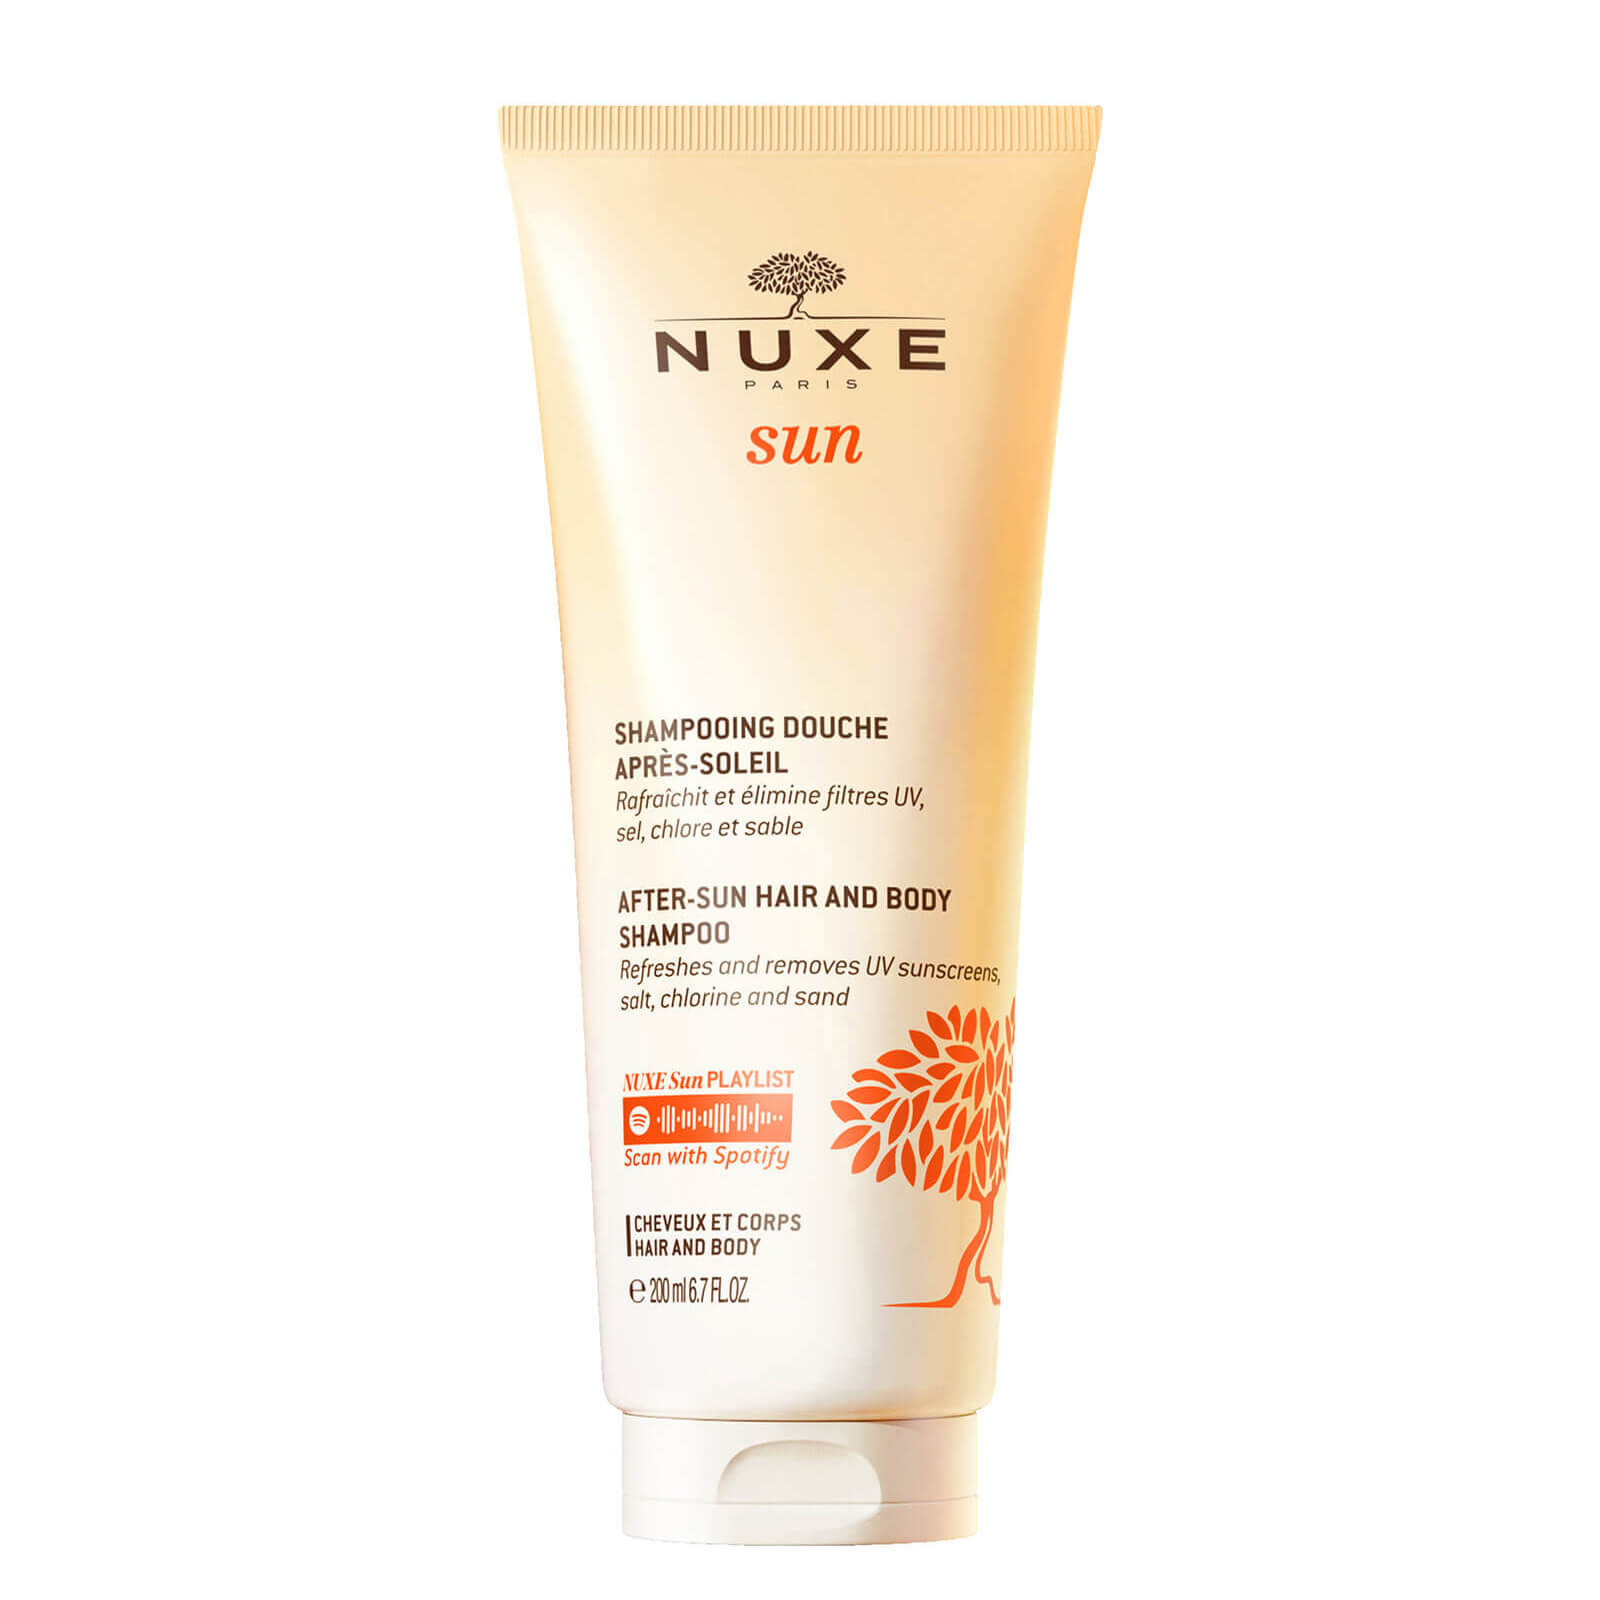 NUXE After-Sun Hair and Body Shampoo 200ml von NUXE